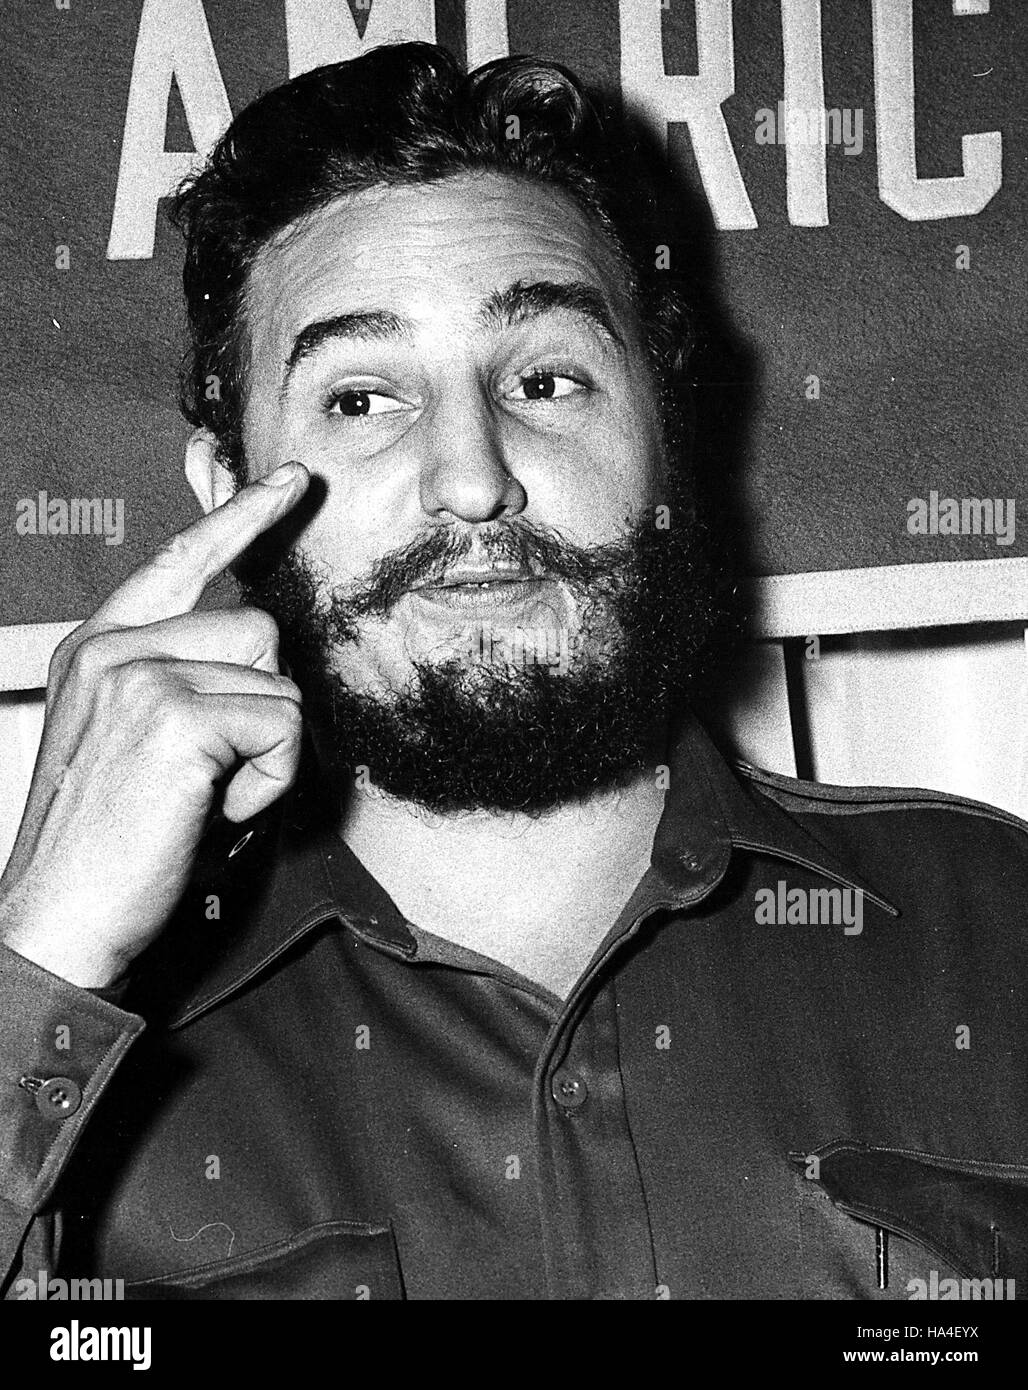 FIDEL ALEJANDRO CASTRO RUZ (August 13, 1926 - November 25, 2016), commonly known as Fidel Castro, was a Cuban politician and revolutionary who governed the Republic of Cuba as Prime Minister from 1959 to 1976 and then as President from 1976 to 2008. Castro was a controversial and divisive world figure. FILE PICTURE: FIDEL CASTRO. 1960's © Globe Photos/ZUMAPRESS.com/Alamy Live News Stock Photo